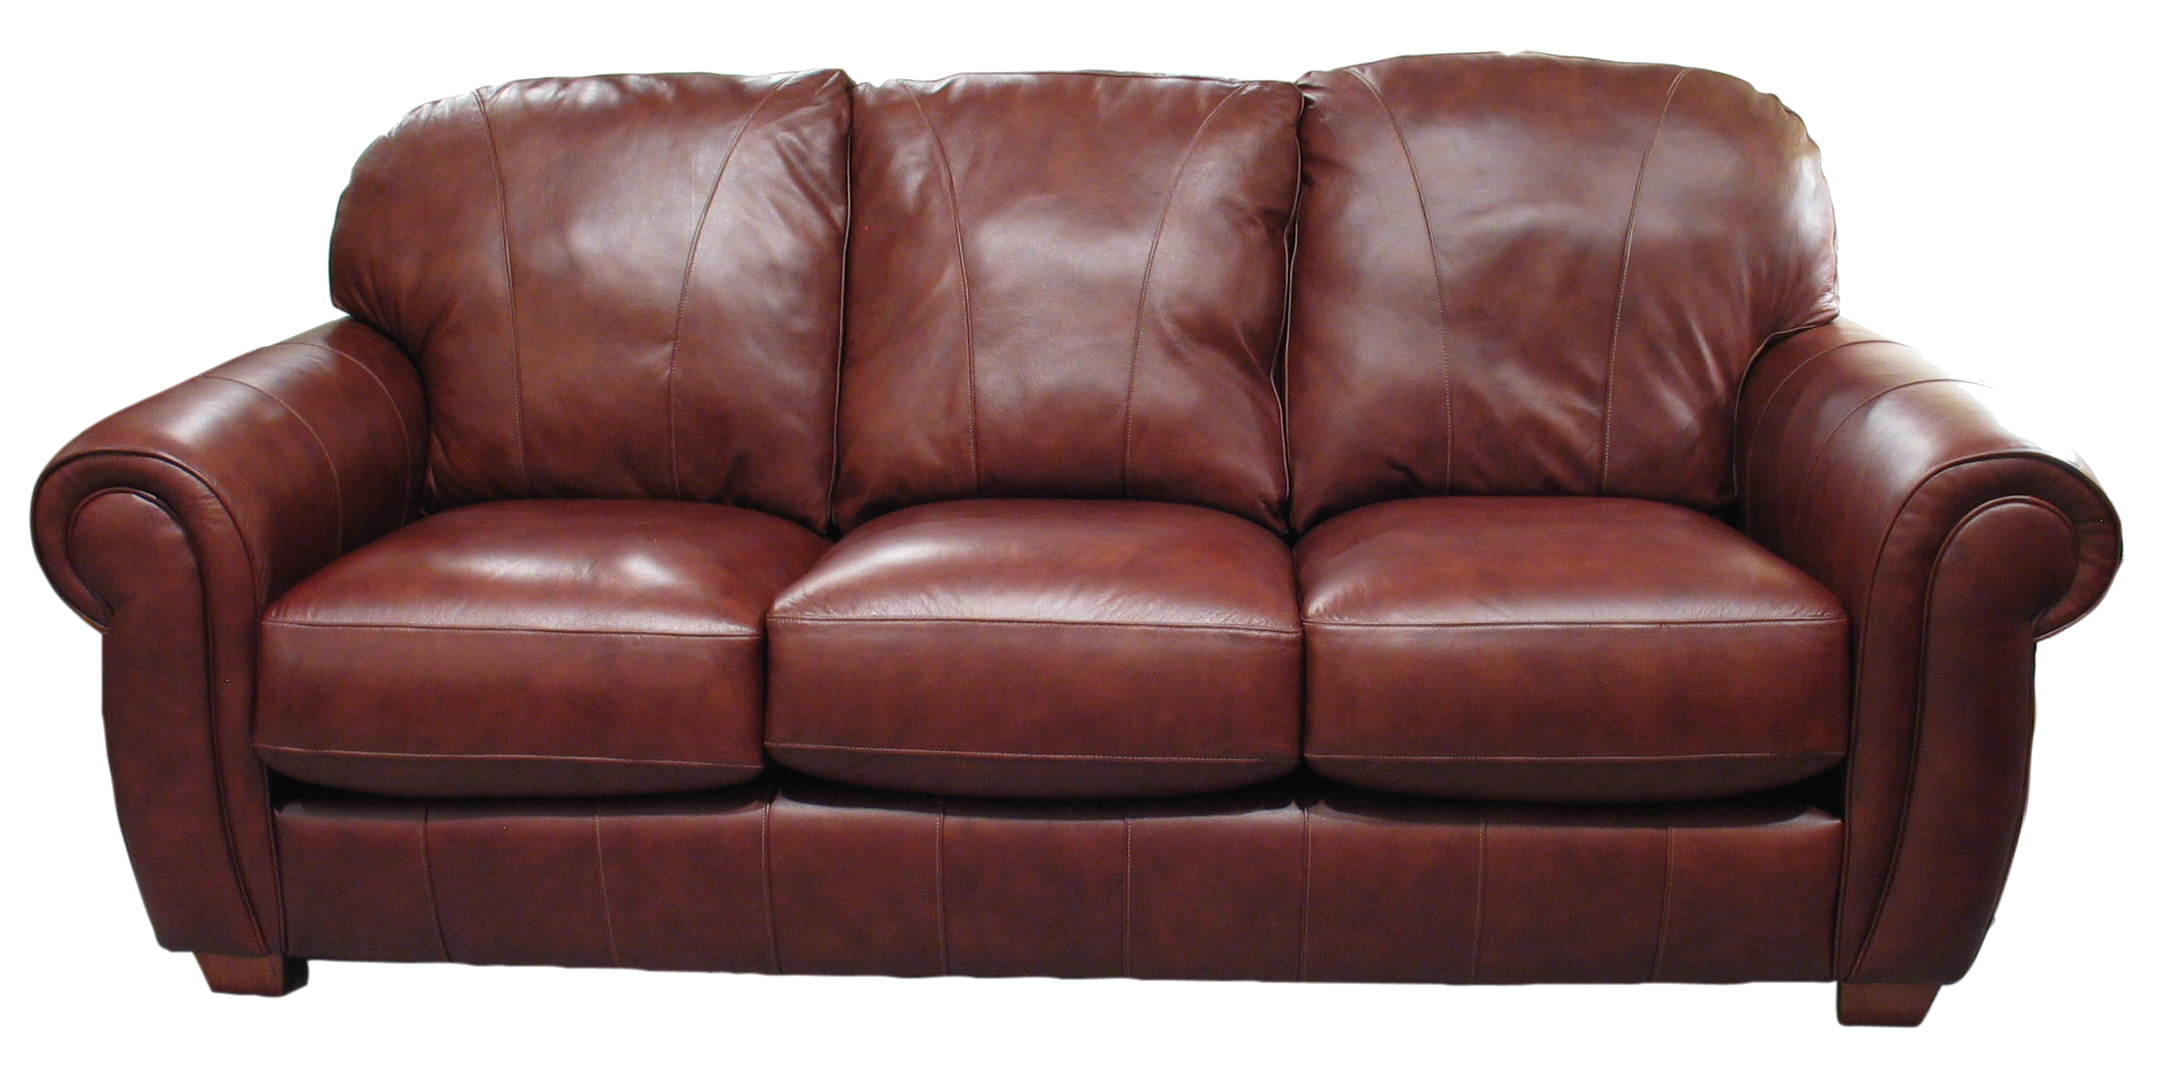 Brown Sofa Png Image - Couch, Transparent background PNG HD thumbnail